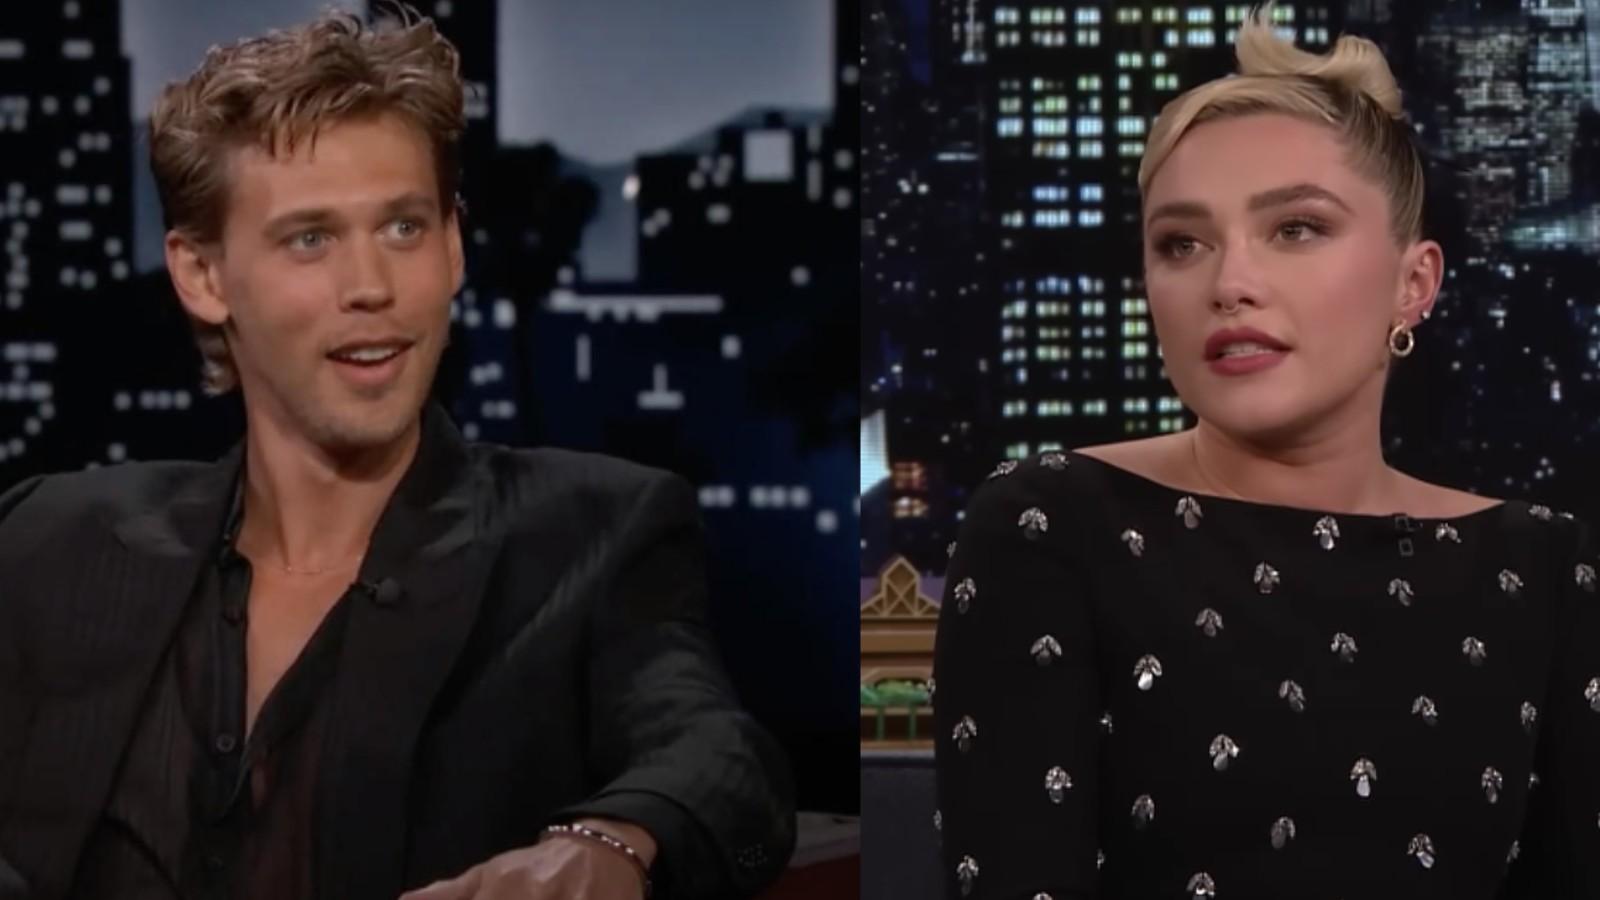 Austin Butler appears on Jimmy Kimmel Live and Florence Pugh appears on The Tonight Show with Jimmy Fallon